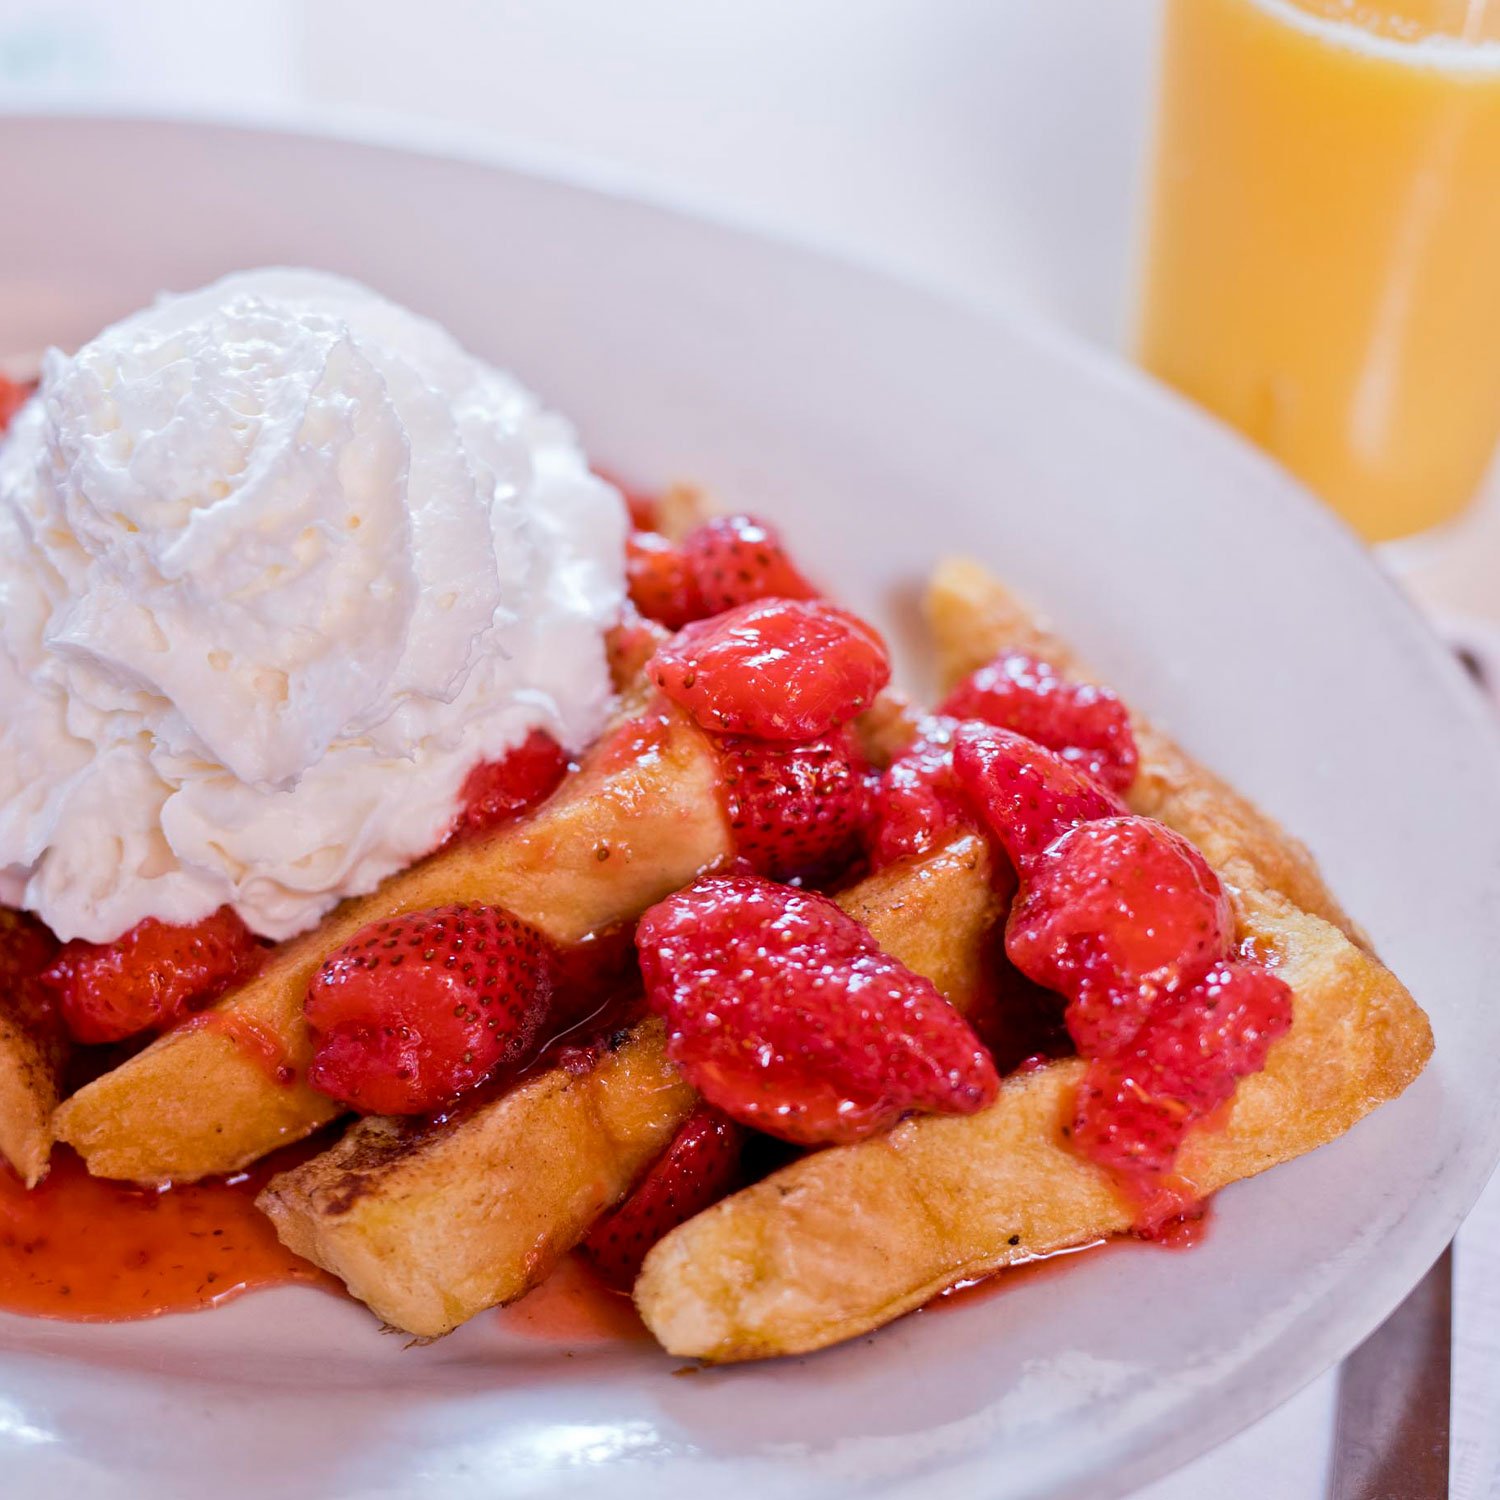 miss-florence-diner-french-toast-strawberries.jpg